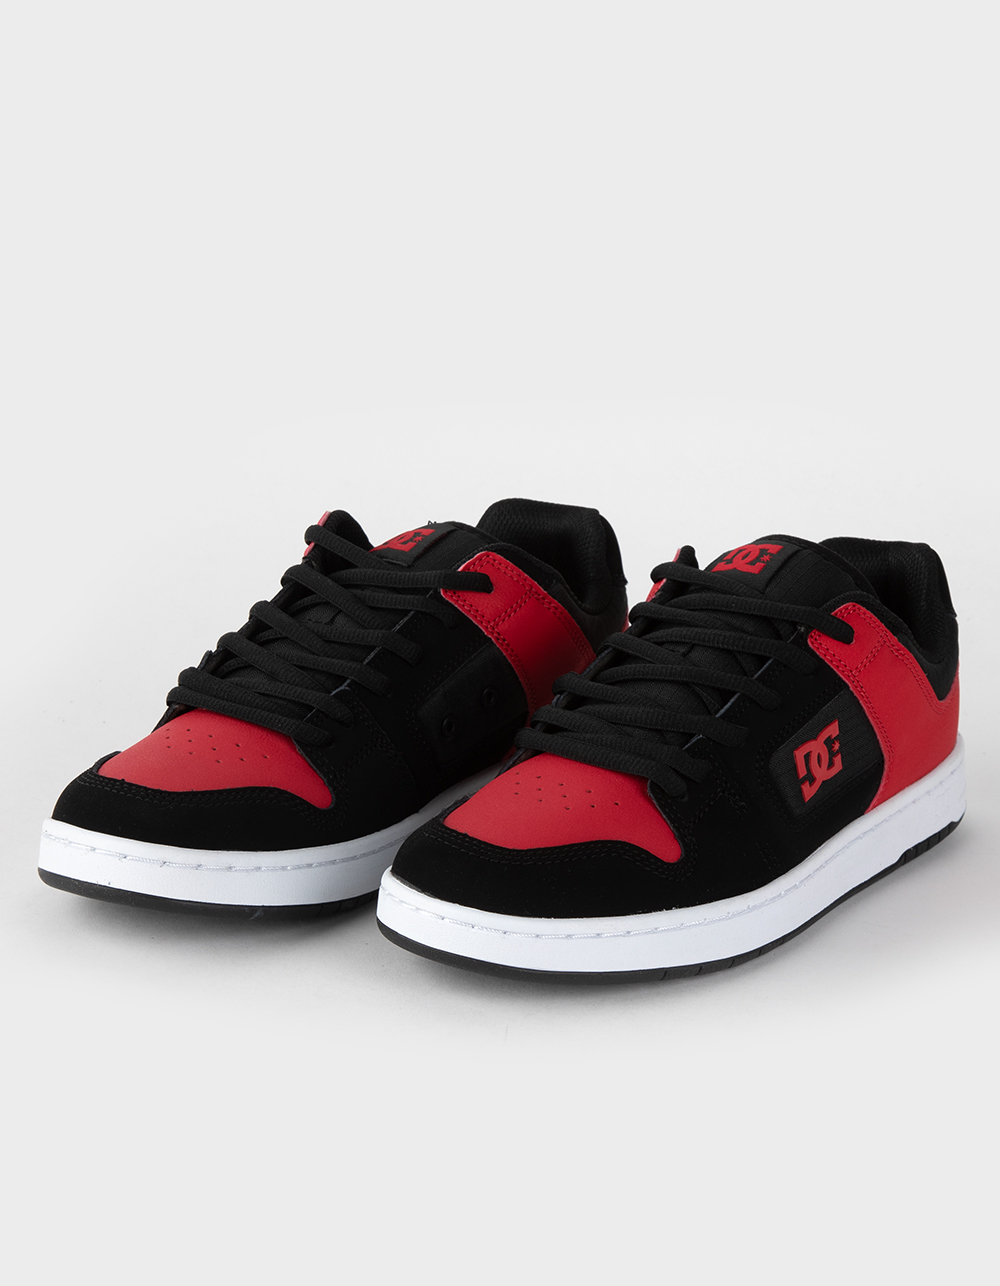 Beweging rots dosis DC SHOES Manteca 4 Mens Shoes - BLK/RED | Tillys